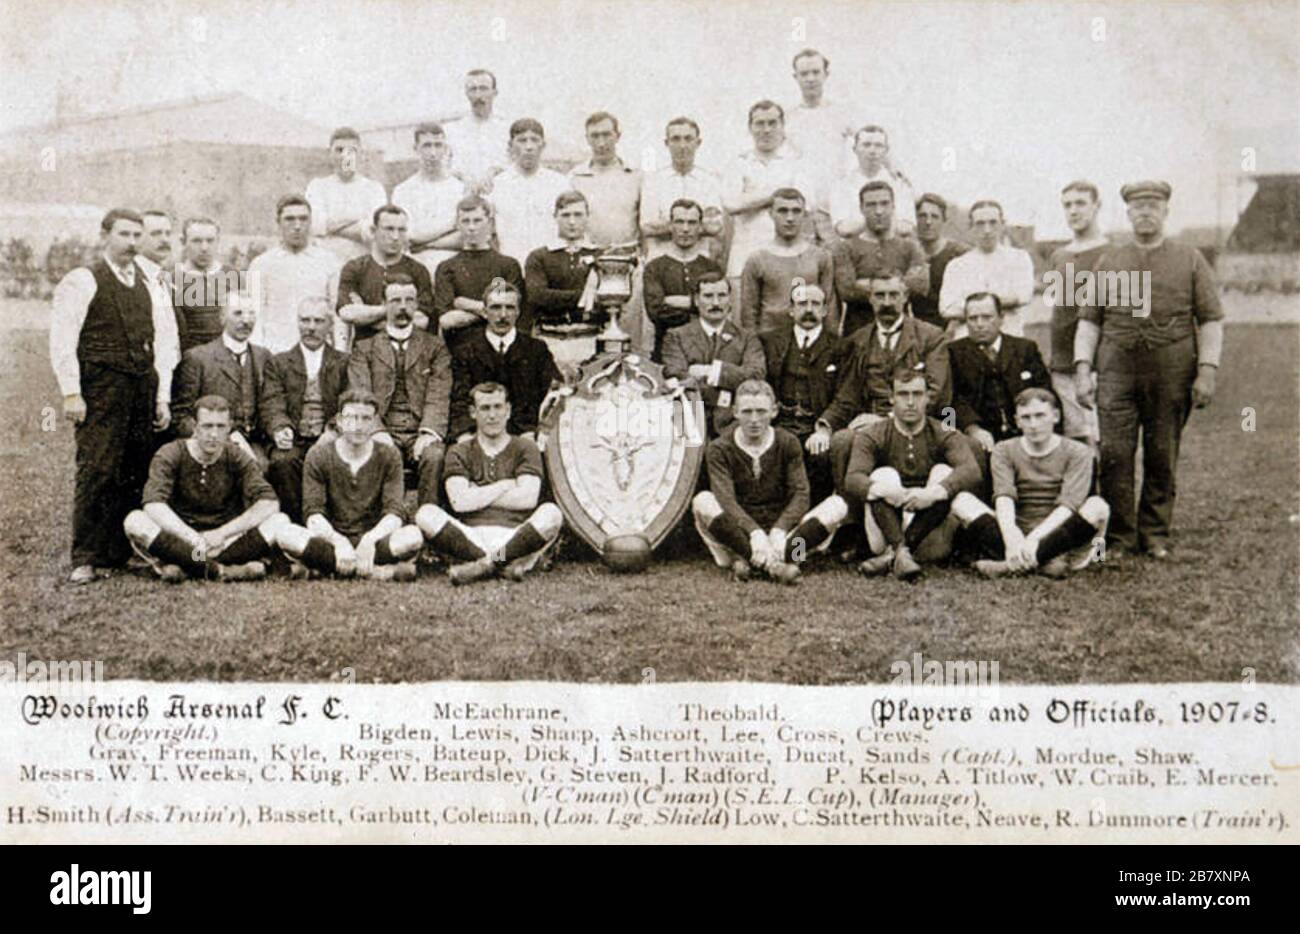 WOOLWICH ARSENAL FOOTBALL TEAM 1908 posing with a shield, probably the London Professional Footballers Association Charity Fund Match trophy. Stock Photo